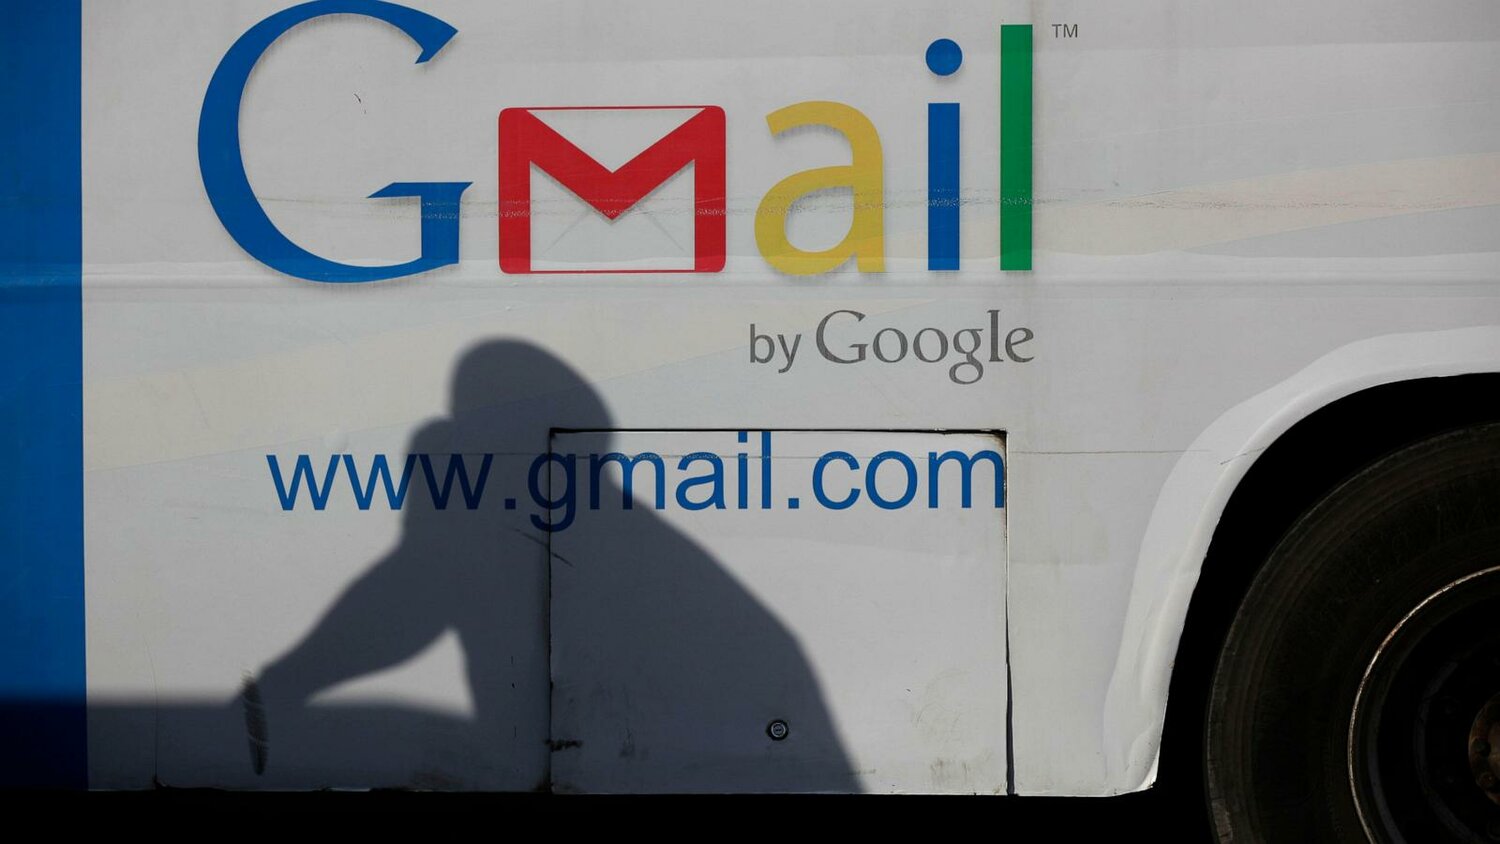 Gmail revolutionized email 20 years ago. People thought it was Google's